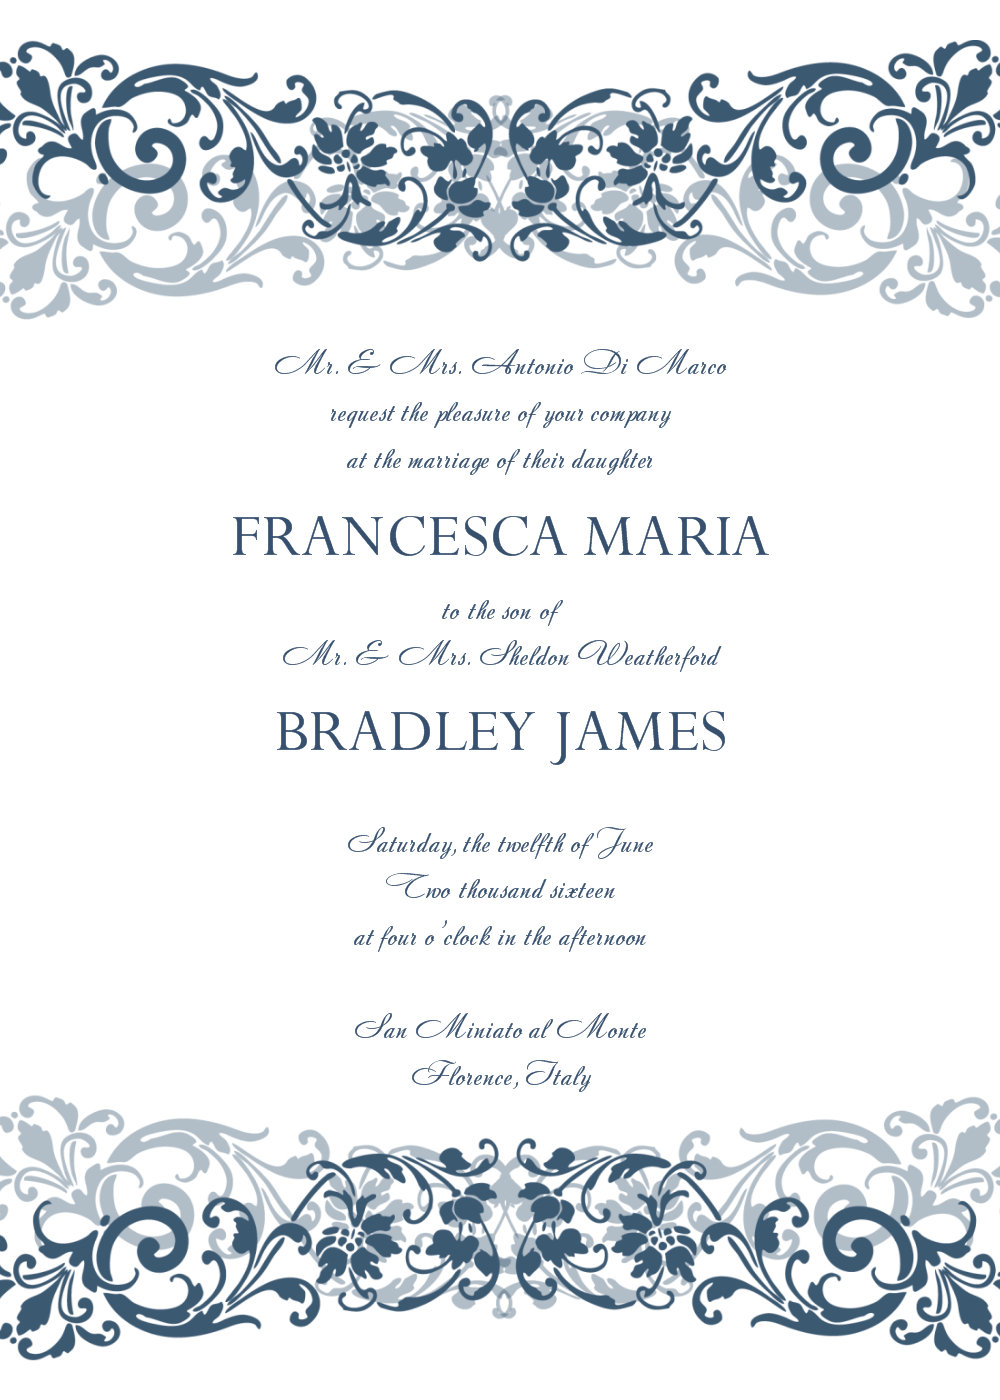 Free Wedding Invitation Templates For Word | Wedding Invitation - Free Printable Wedding Invitations With Photo